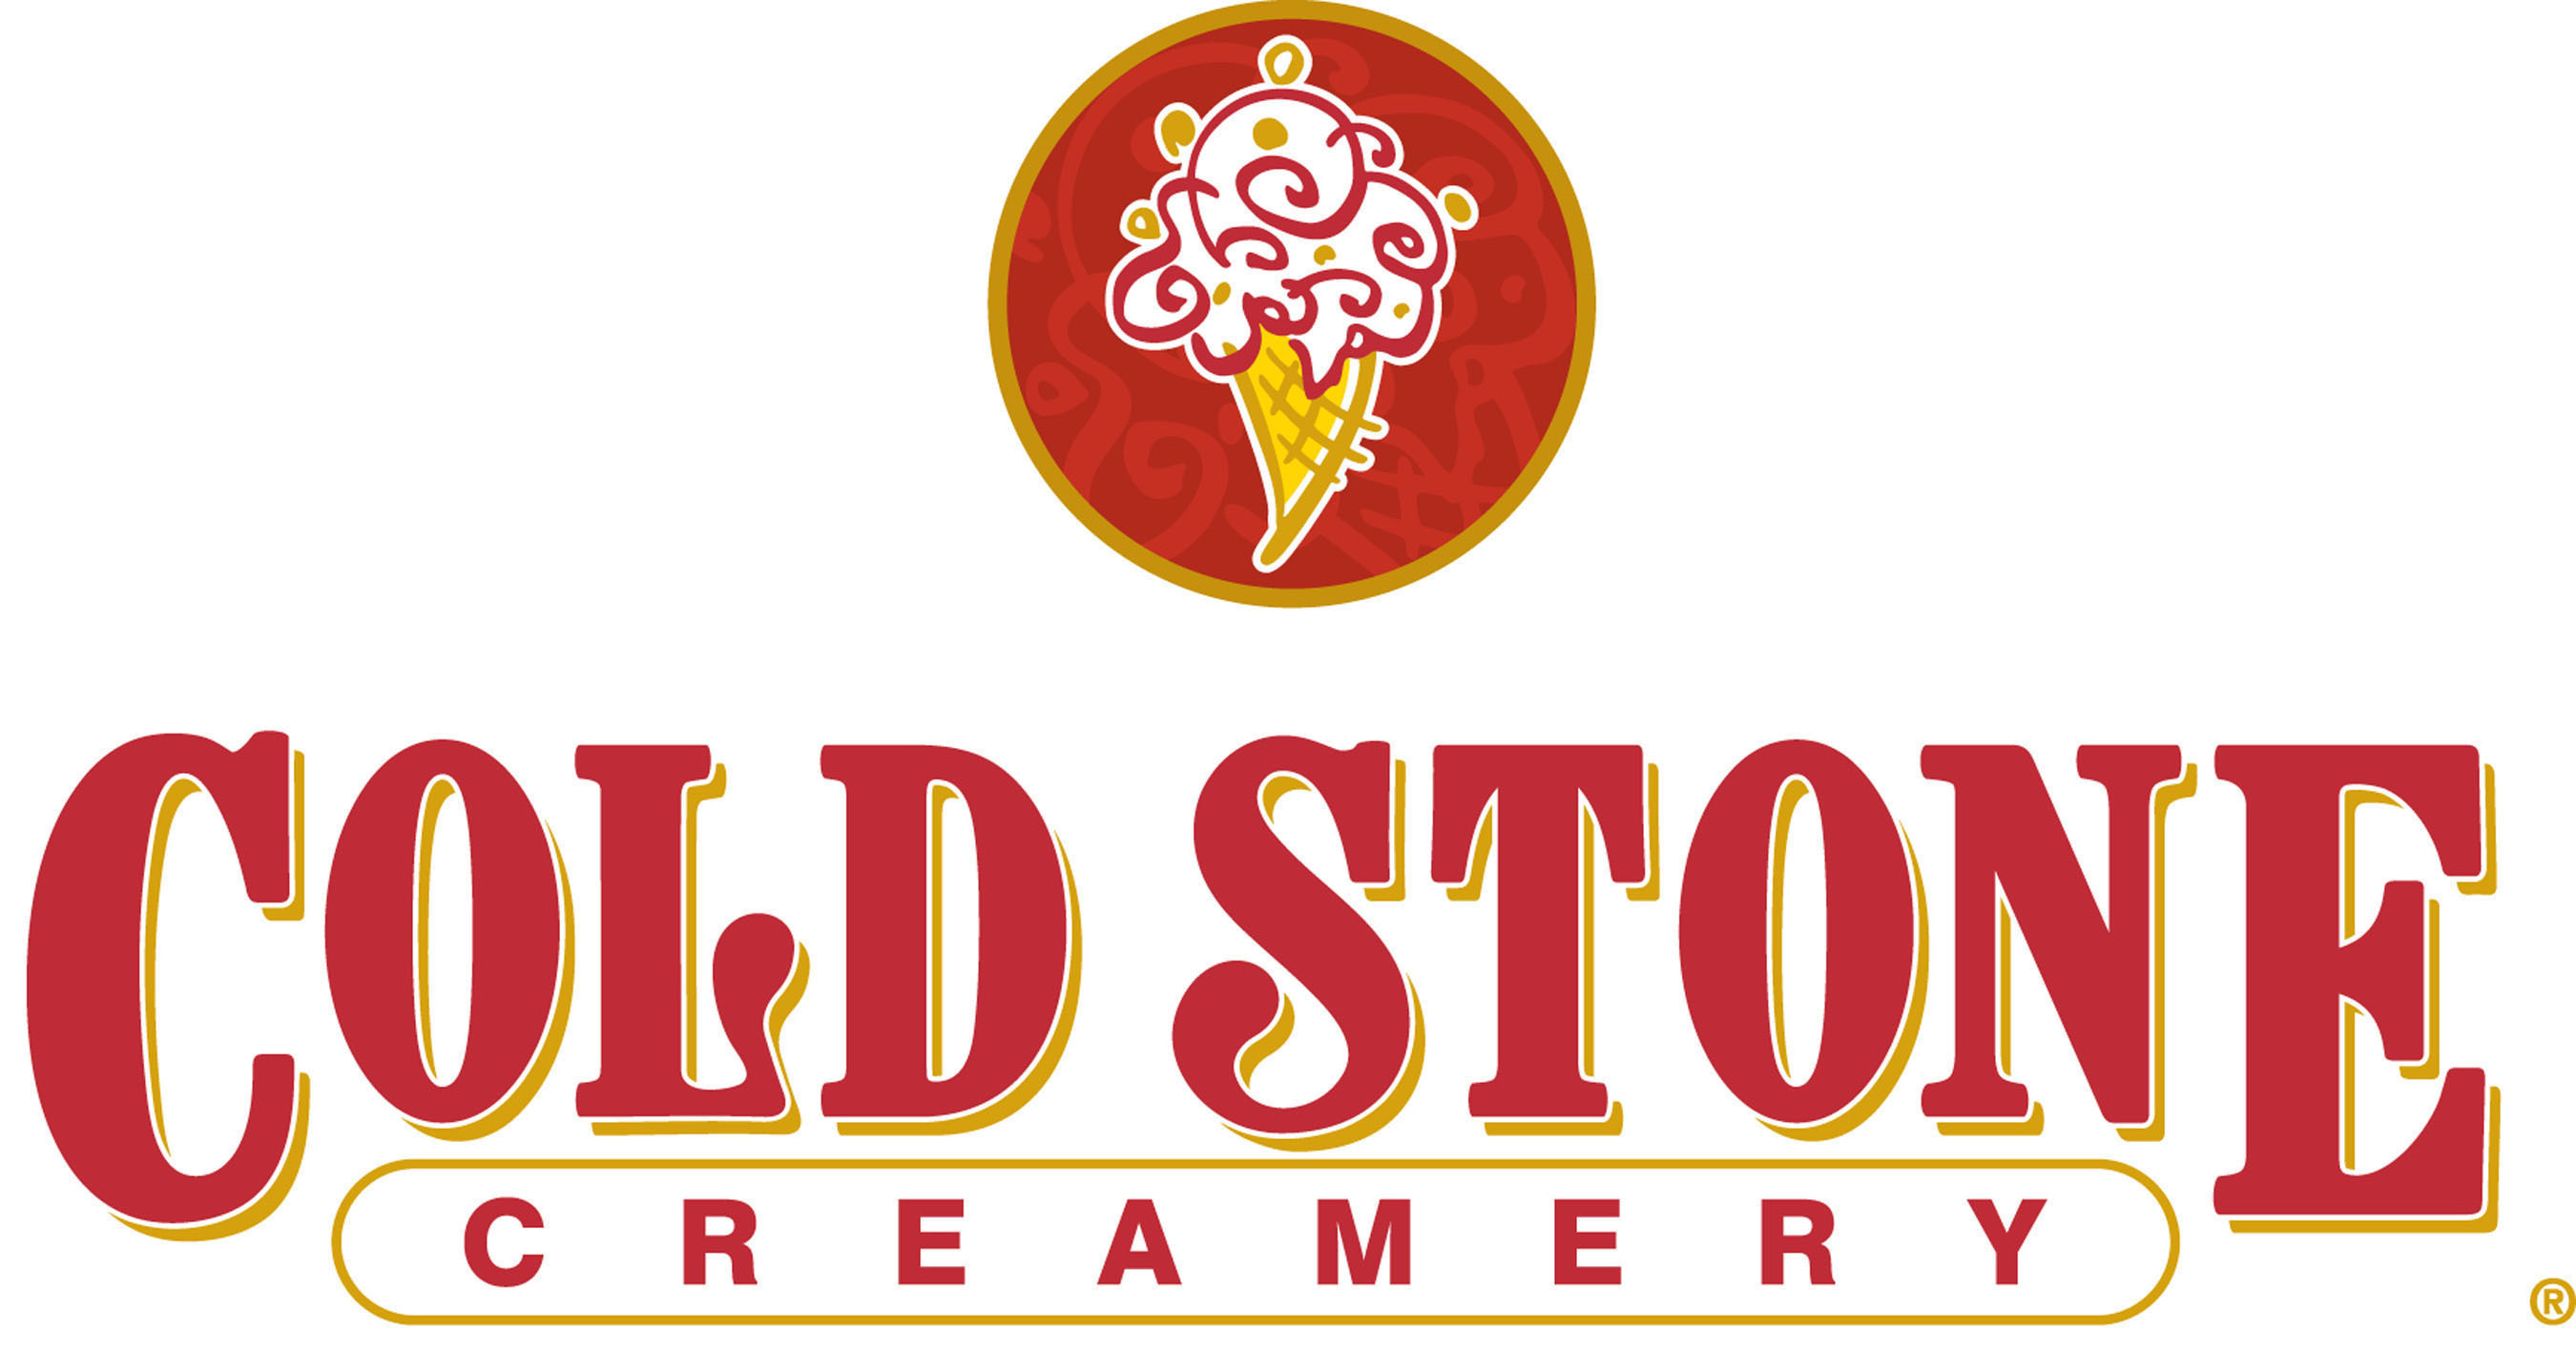 Cold Stone Creamery delivers The Ultimate Ice Cream Experience(r) through a community of franchisees who are passionate about ice cream. The secret recipe for smooth and creamy ice cream is handcrafted fresh daily in each store, and then customized by combining a variety of mix-ins on a frozen granite stone. Headquartered in Scottsdale, Ariz., Cold Stone Creamery is a subsidiary of Kahala Brands, one of the fastest growing franchising companies in the world. For more information about Cold Stone Creamery, visit www.ColdStoneCreamery.com